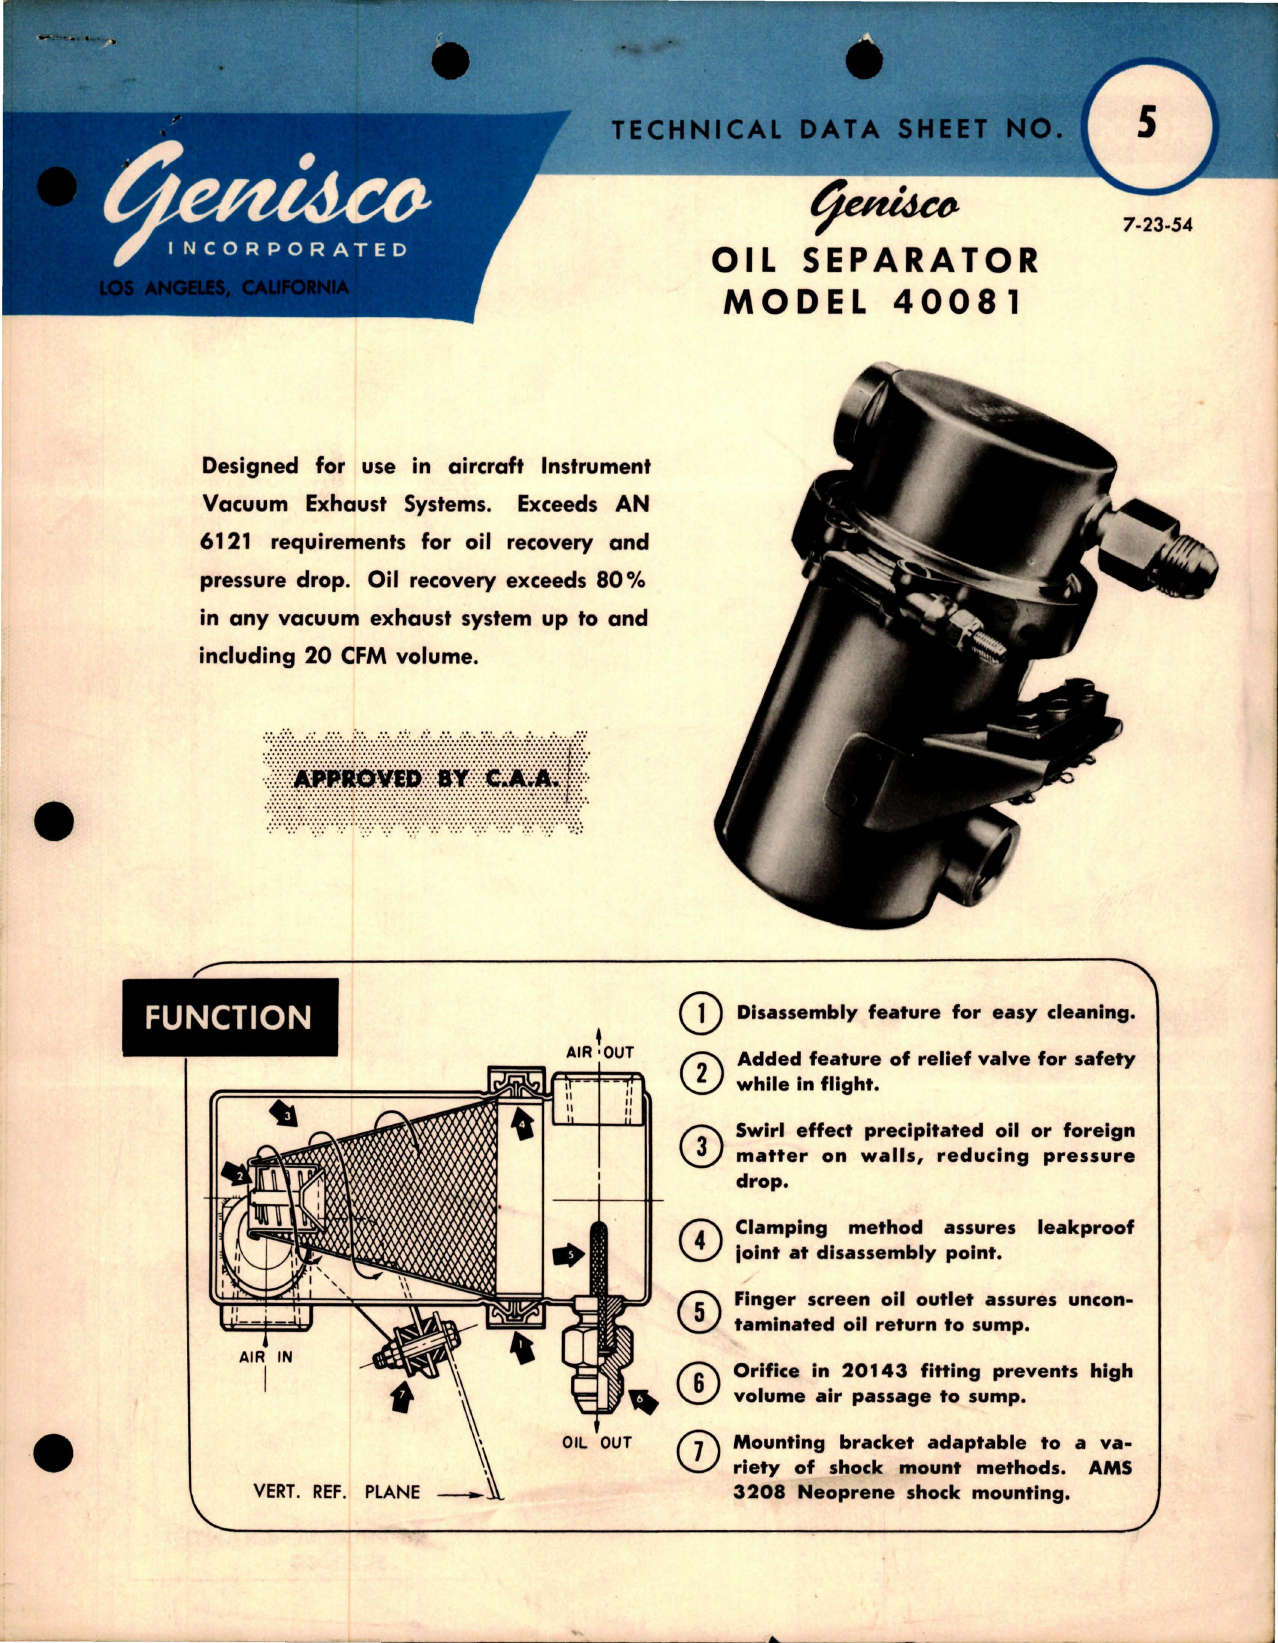 Sample page 1 from AirCorps Library document: Technical Data Sheet for Oil Separator - Model 40081 